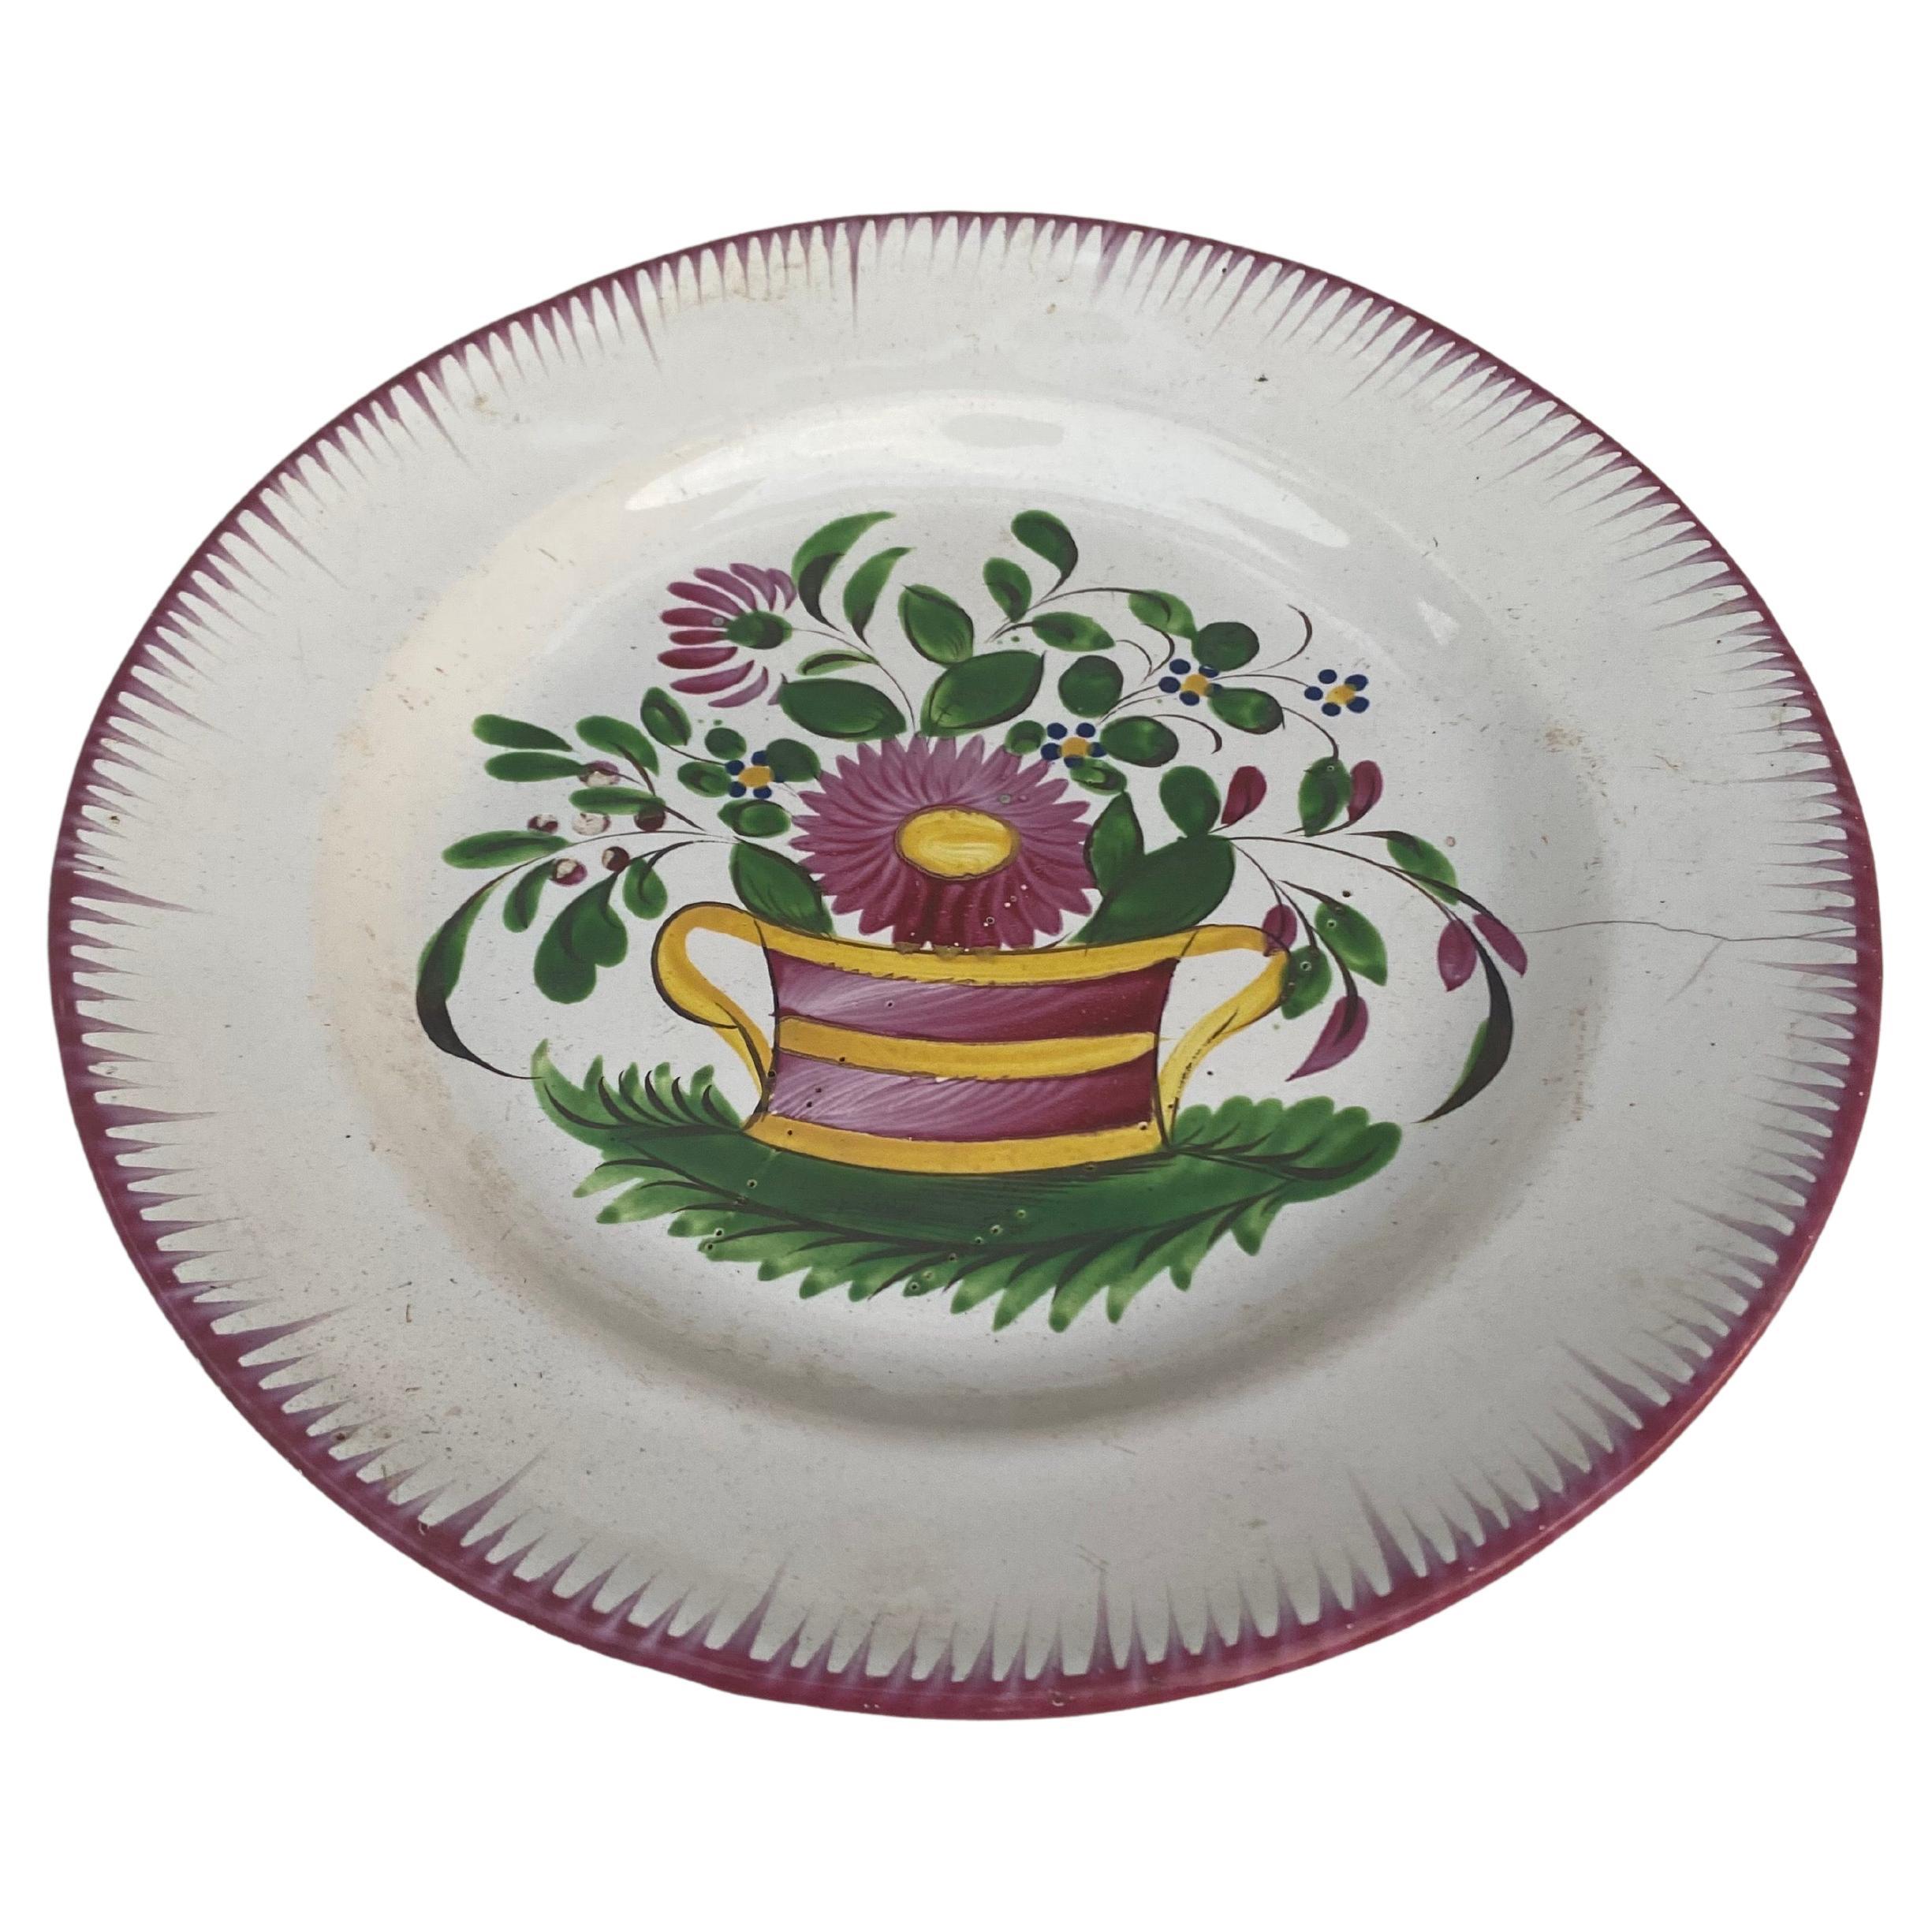 19th Century French faience plate with flowers.
From East of France, Les Islettes.